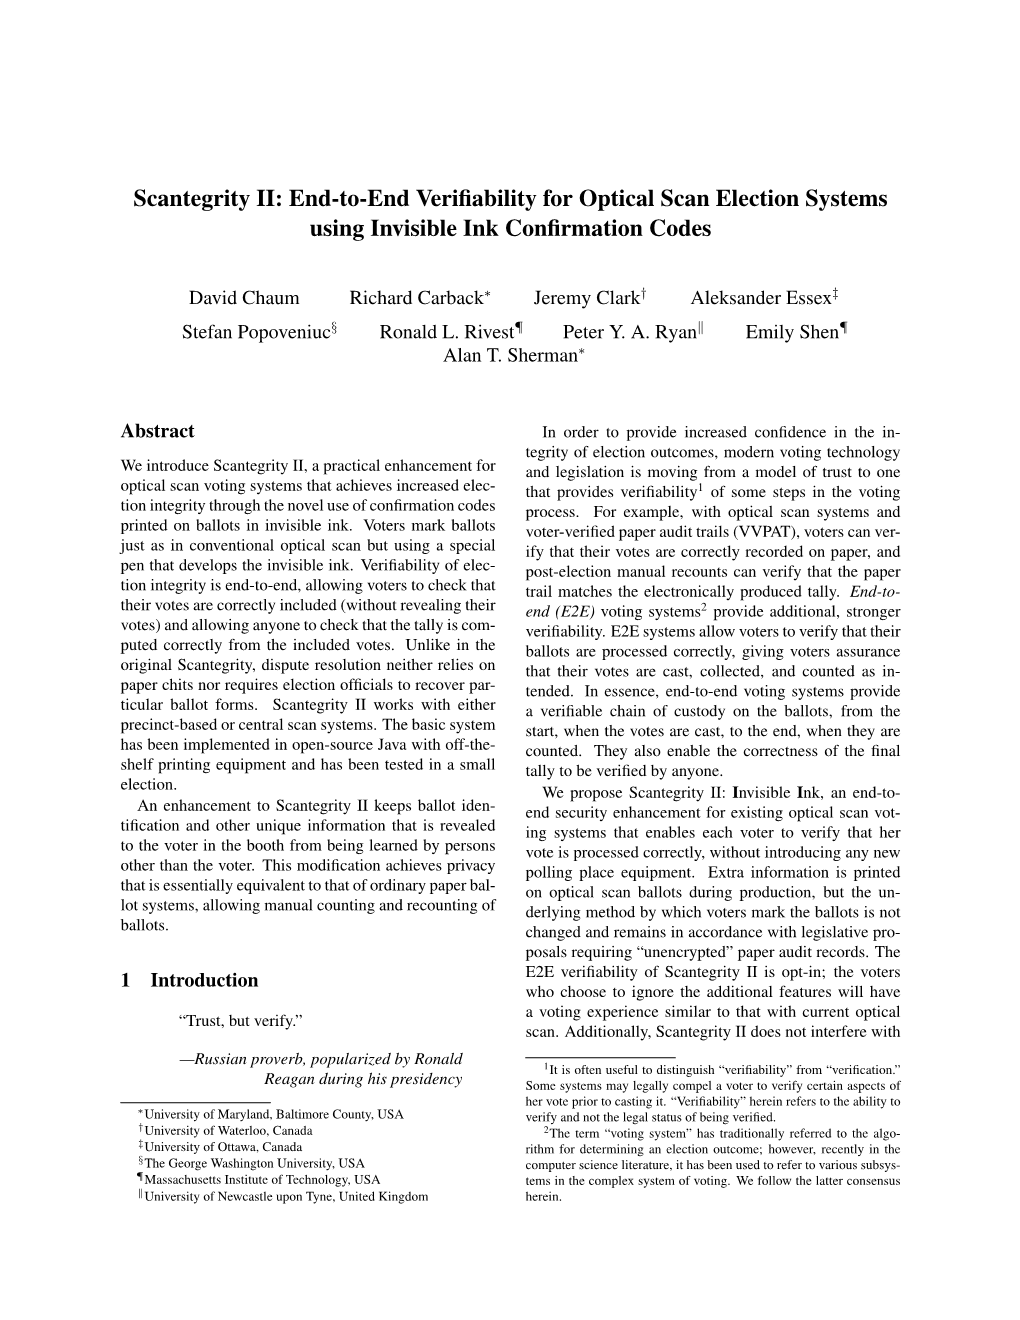 Scantegrity II: End-To-End Verifiability for Optical Scan Election Systems